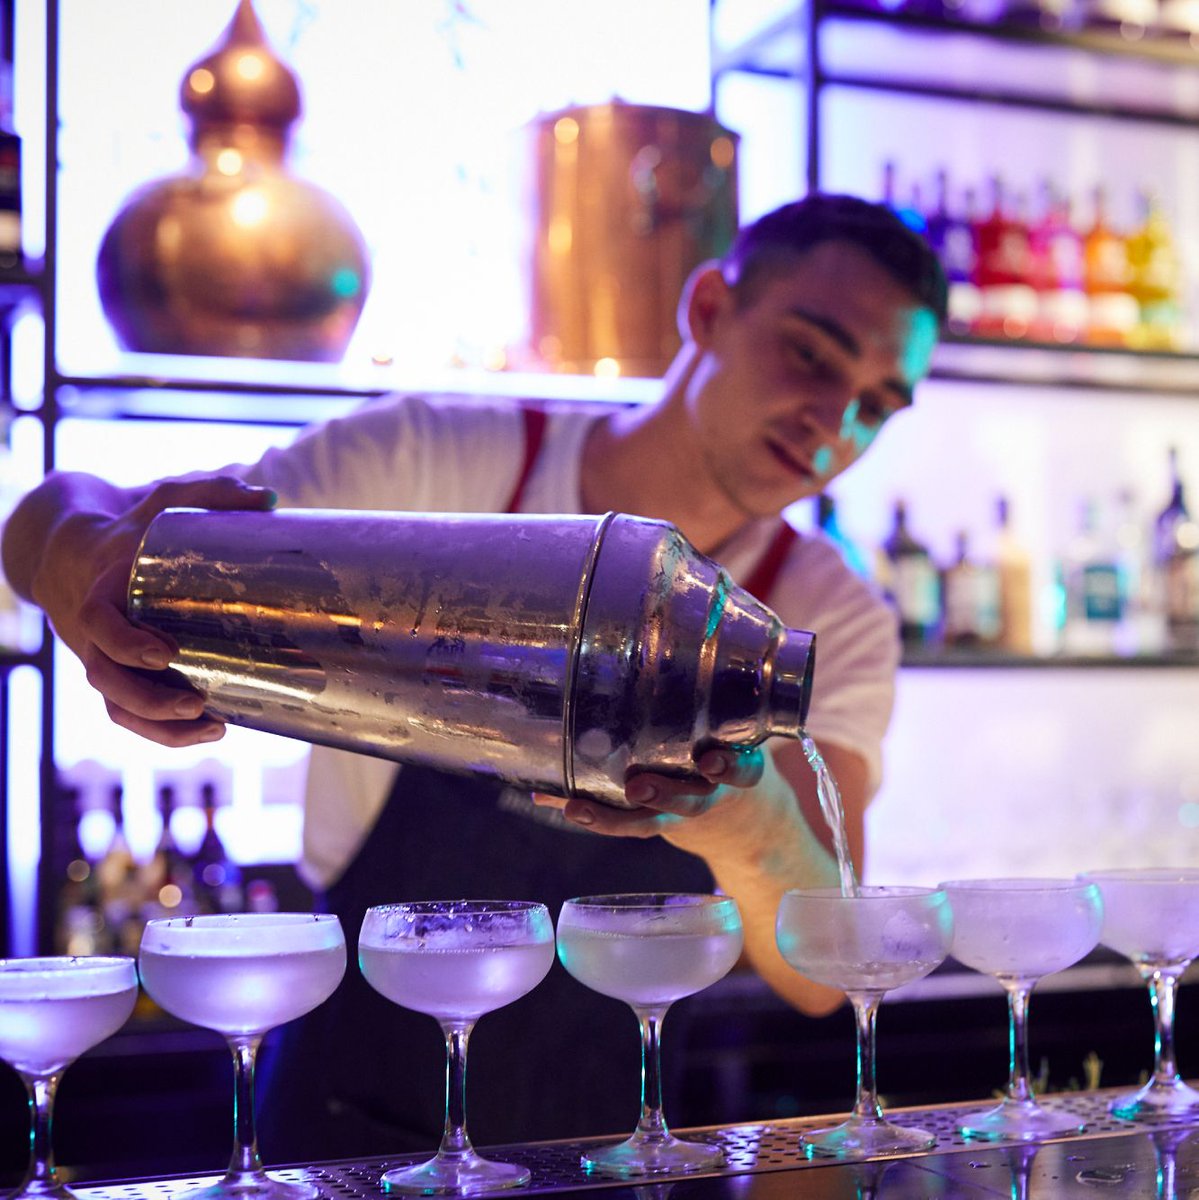 Are you ready for the weekend? 👀 Because we most certainly are! 😏 Our bartenders are raring to go and ready to serve up a storm of insanely delicious drinks, at the #CityofLondonDistillery. What cocktail will you be indulging in this evening? 🍸 #WhitleyNeillGin